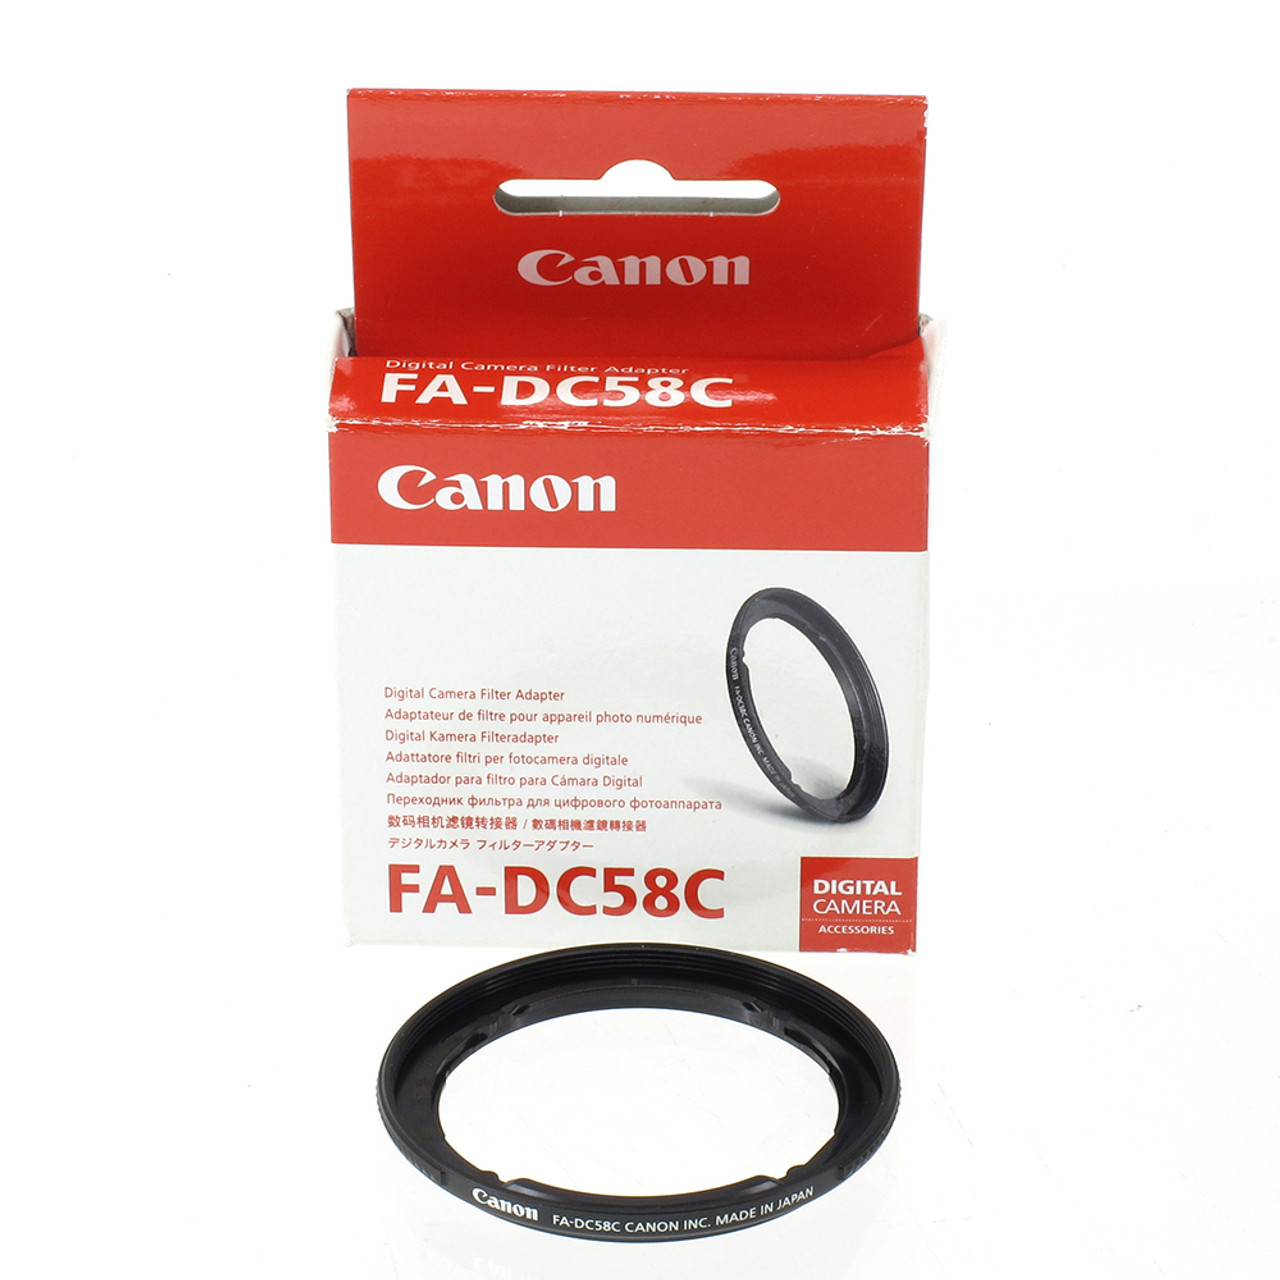 USED CANON FA-DC58C FILTER ADAPTER